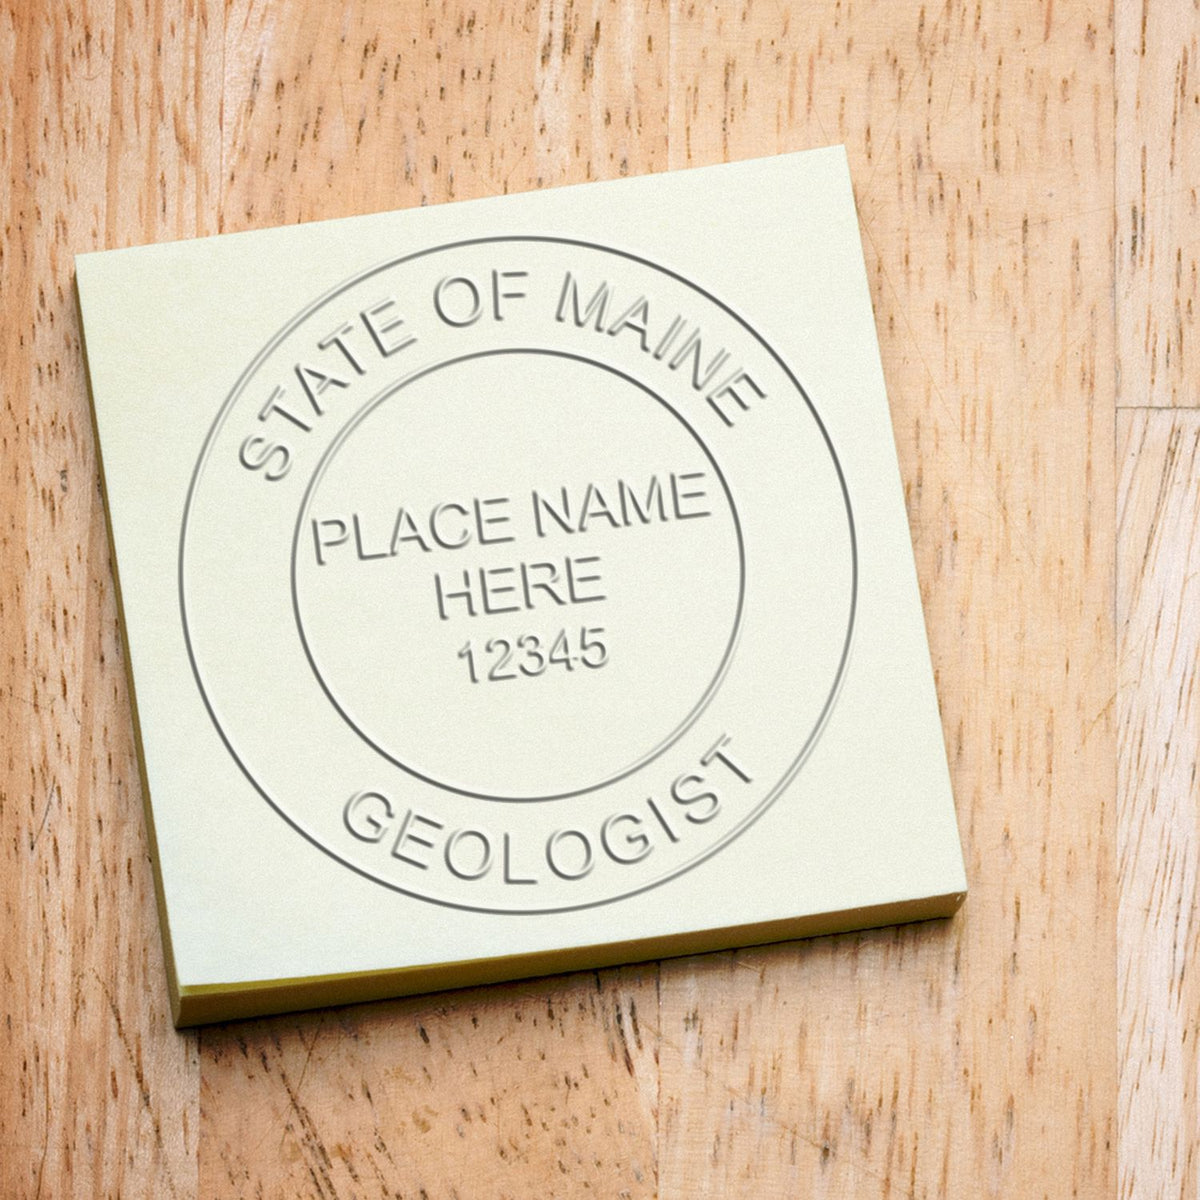 An in use photo of the Maine Geologist Desk Seal showing a sample imprint on a cardstock